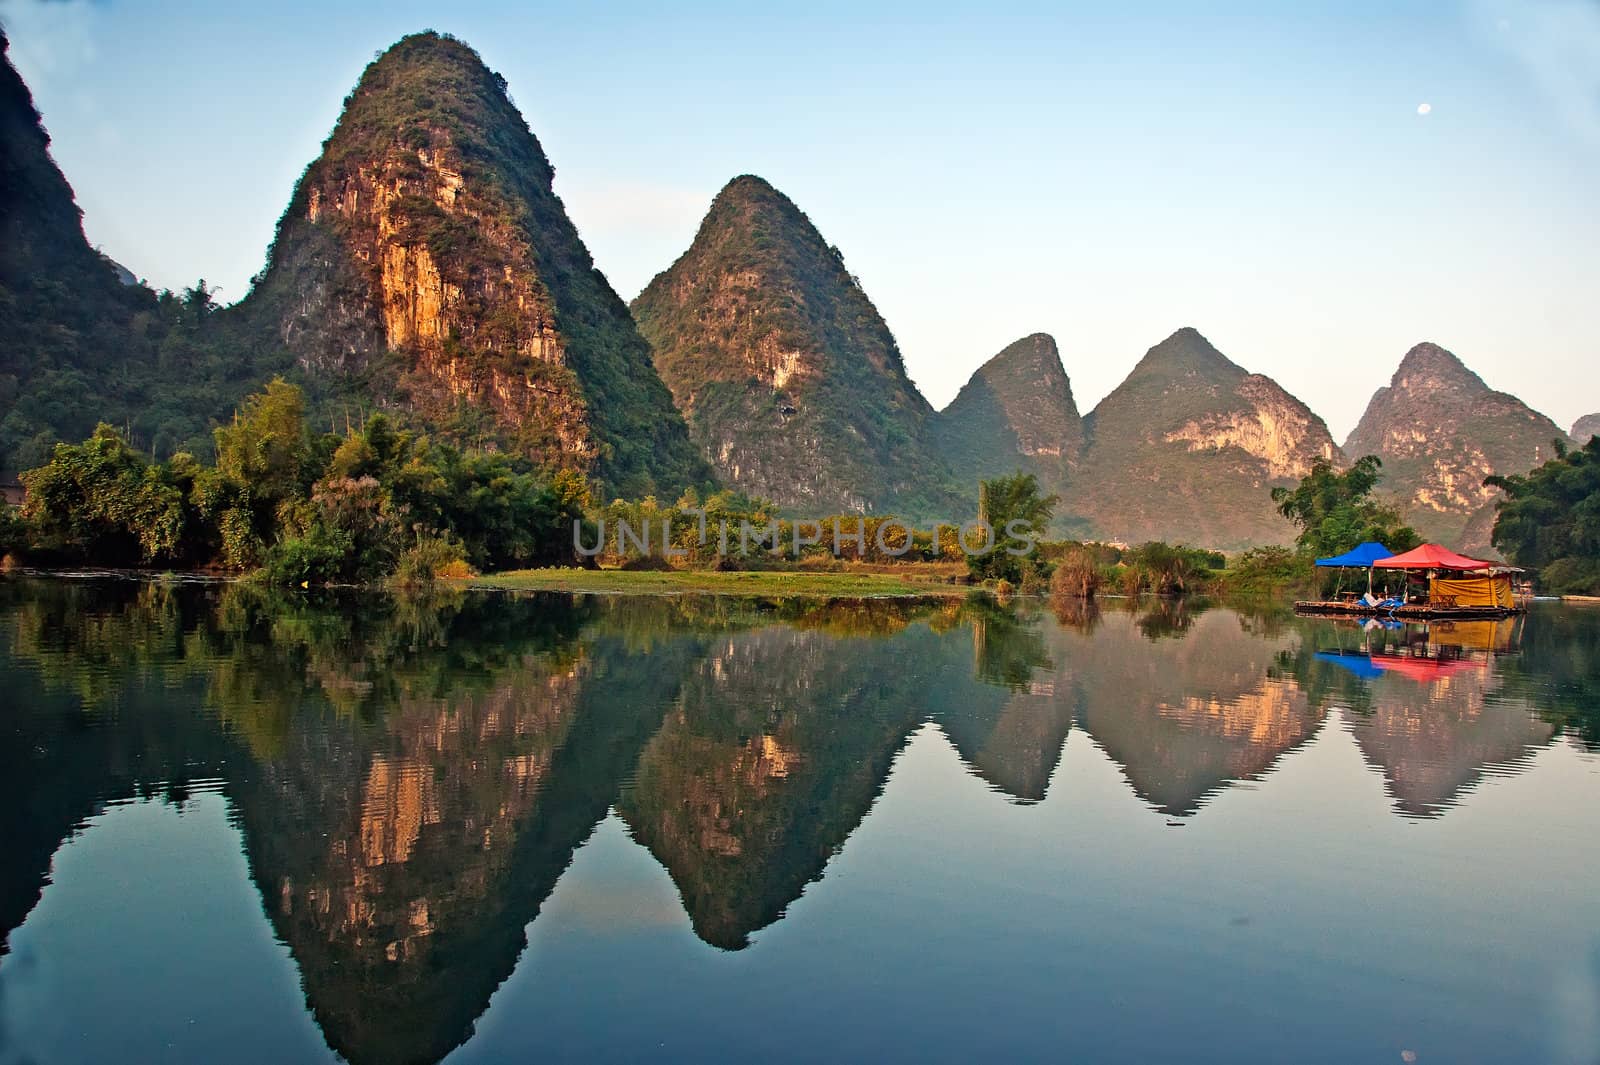 Beauty of Yangshuo Karst in Guilin, China by xfdly5